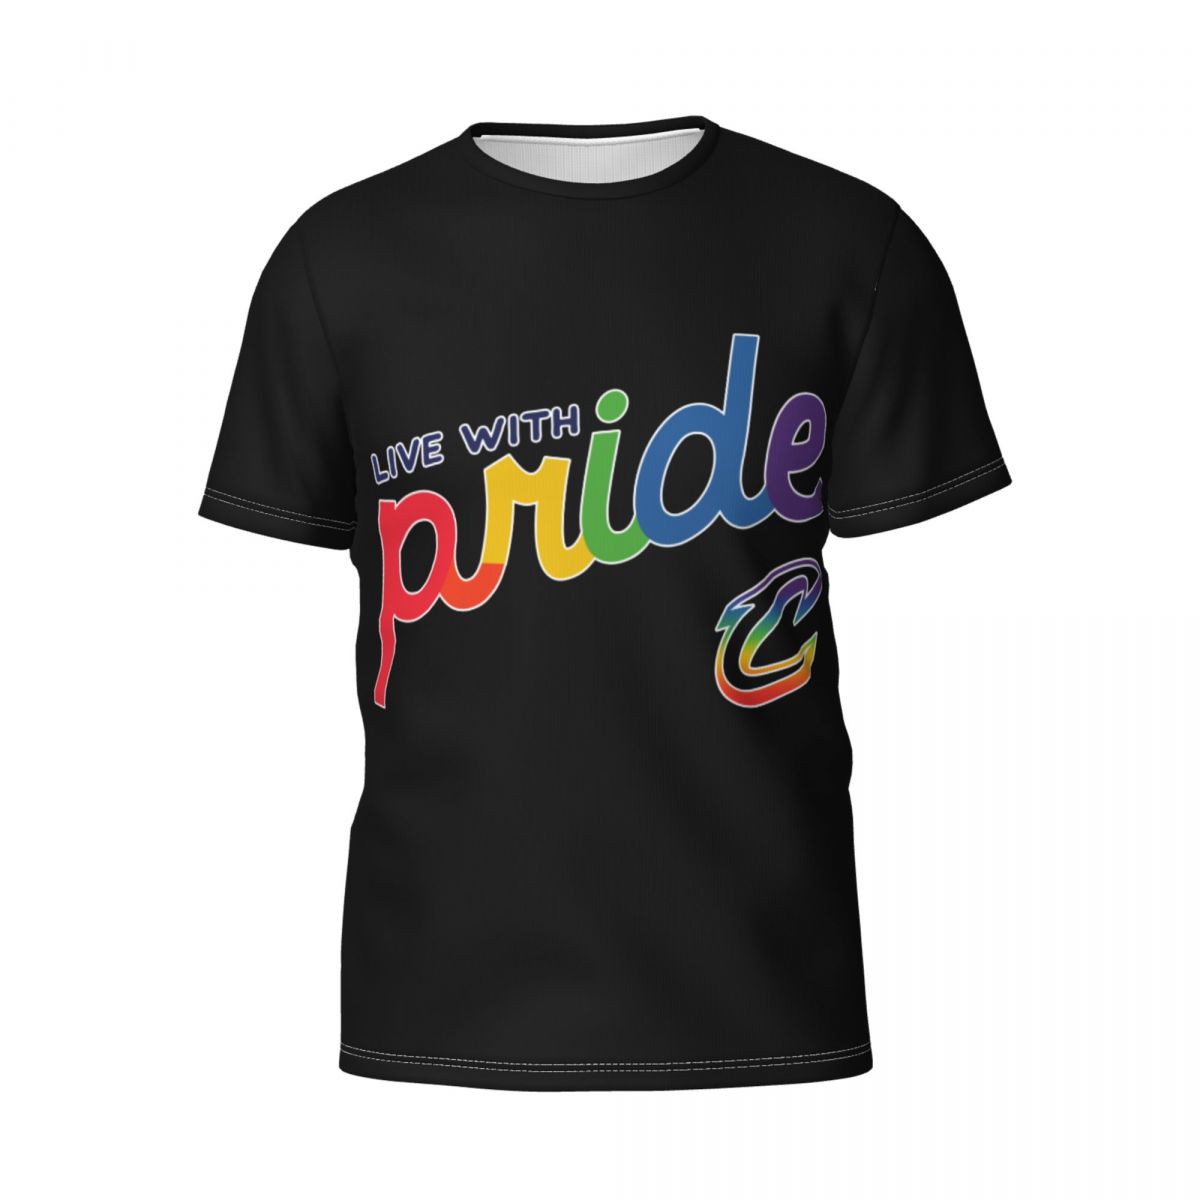 Cleveland Cavaliers Live With Pride Men's Short Sleeve Shirt